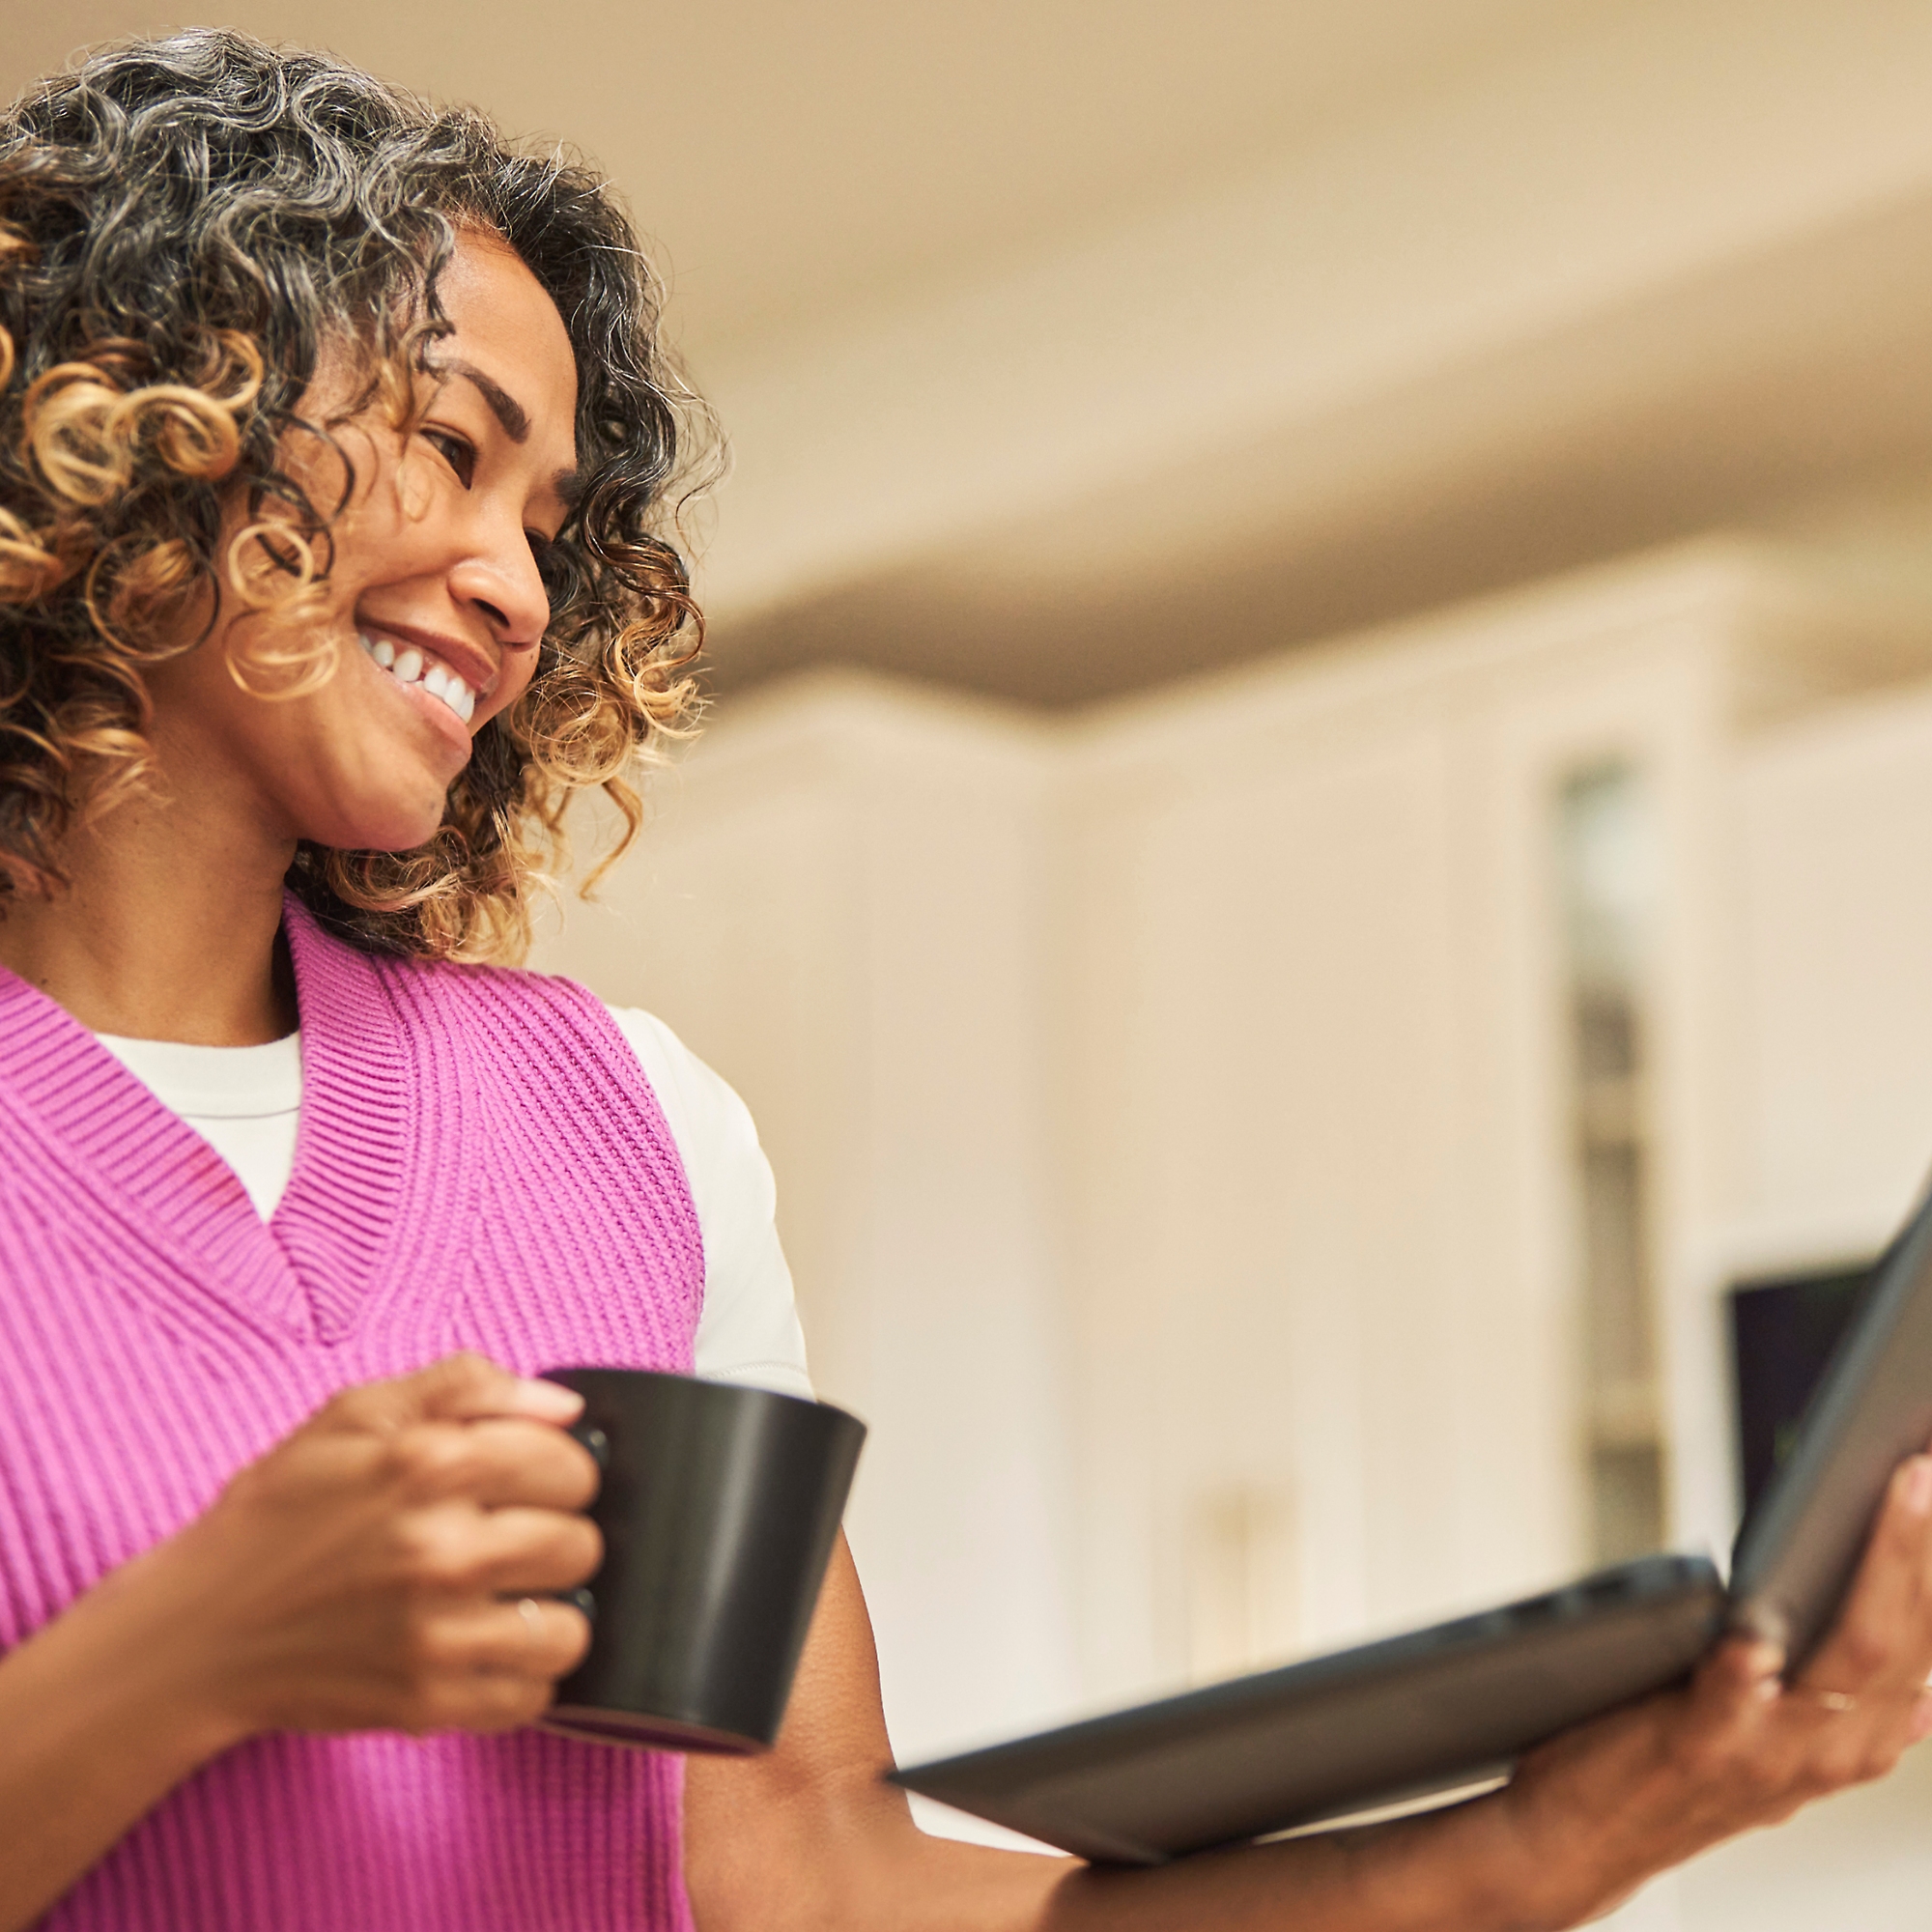 A woman smiling with coffee cup in one hand and laptop in another